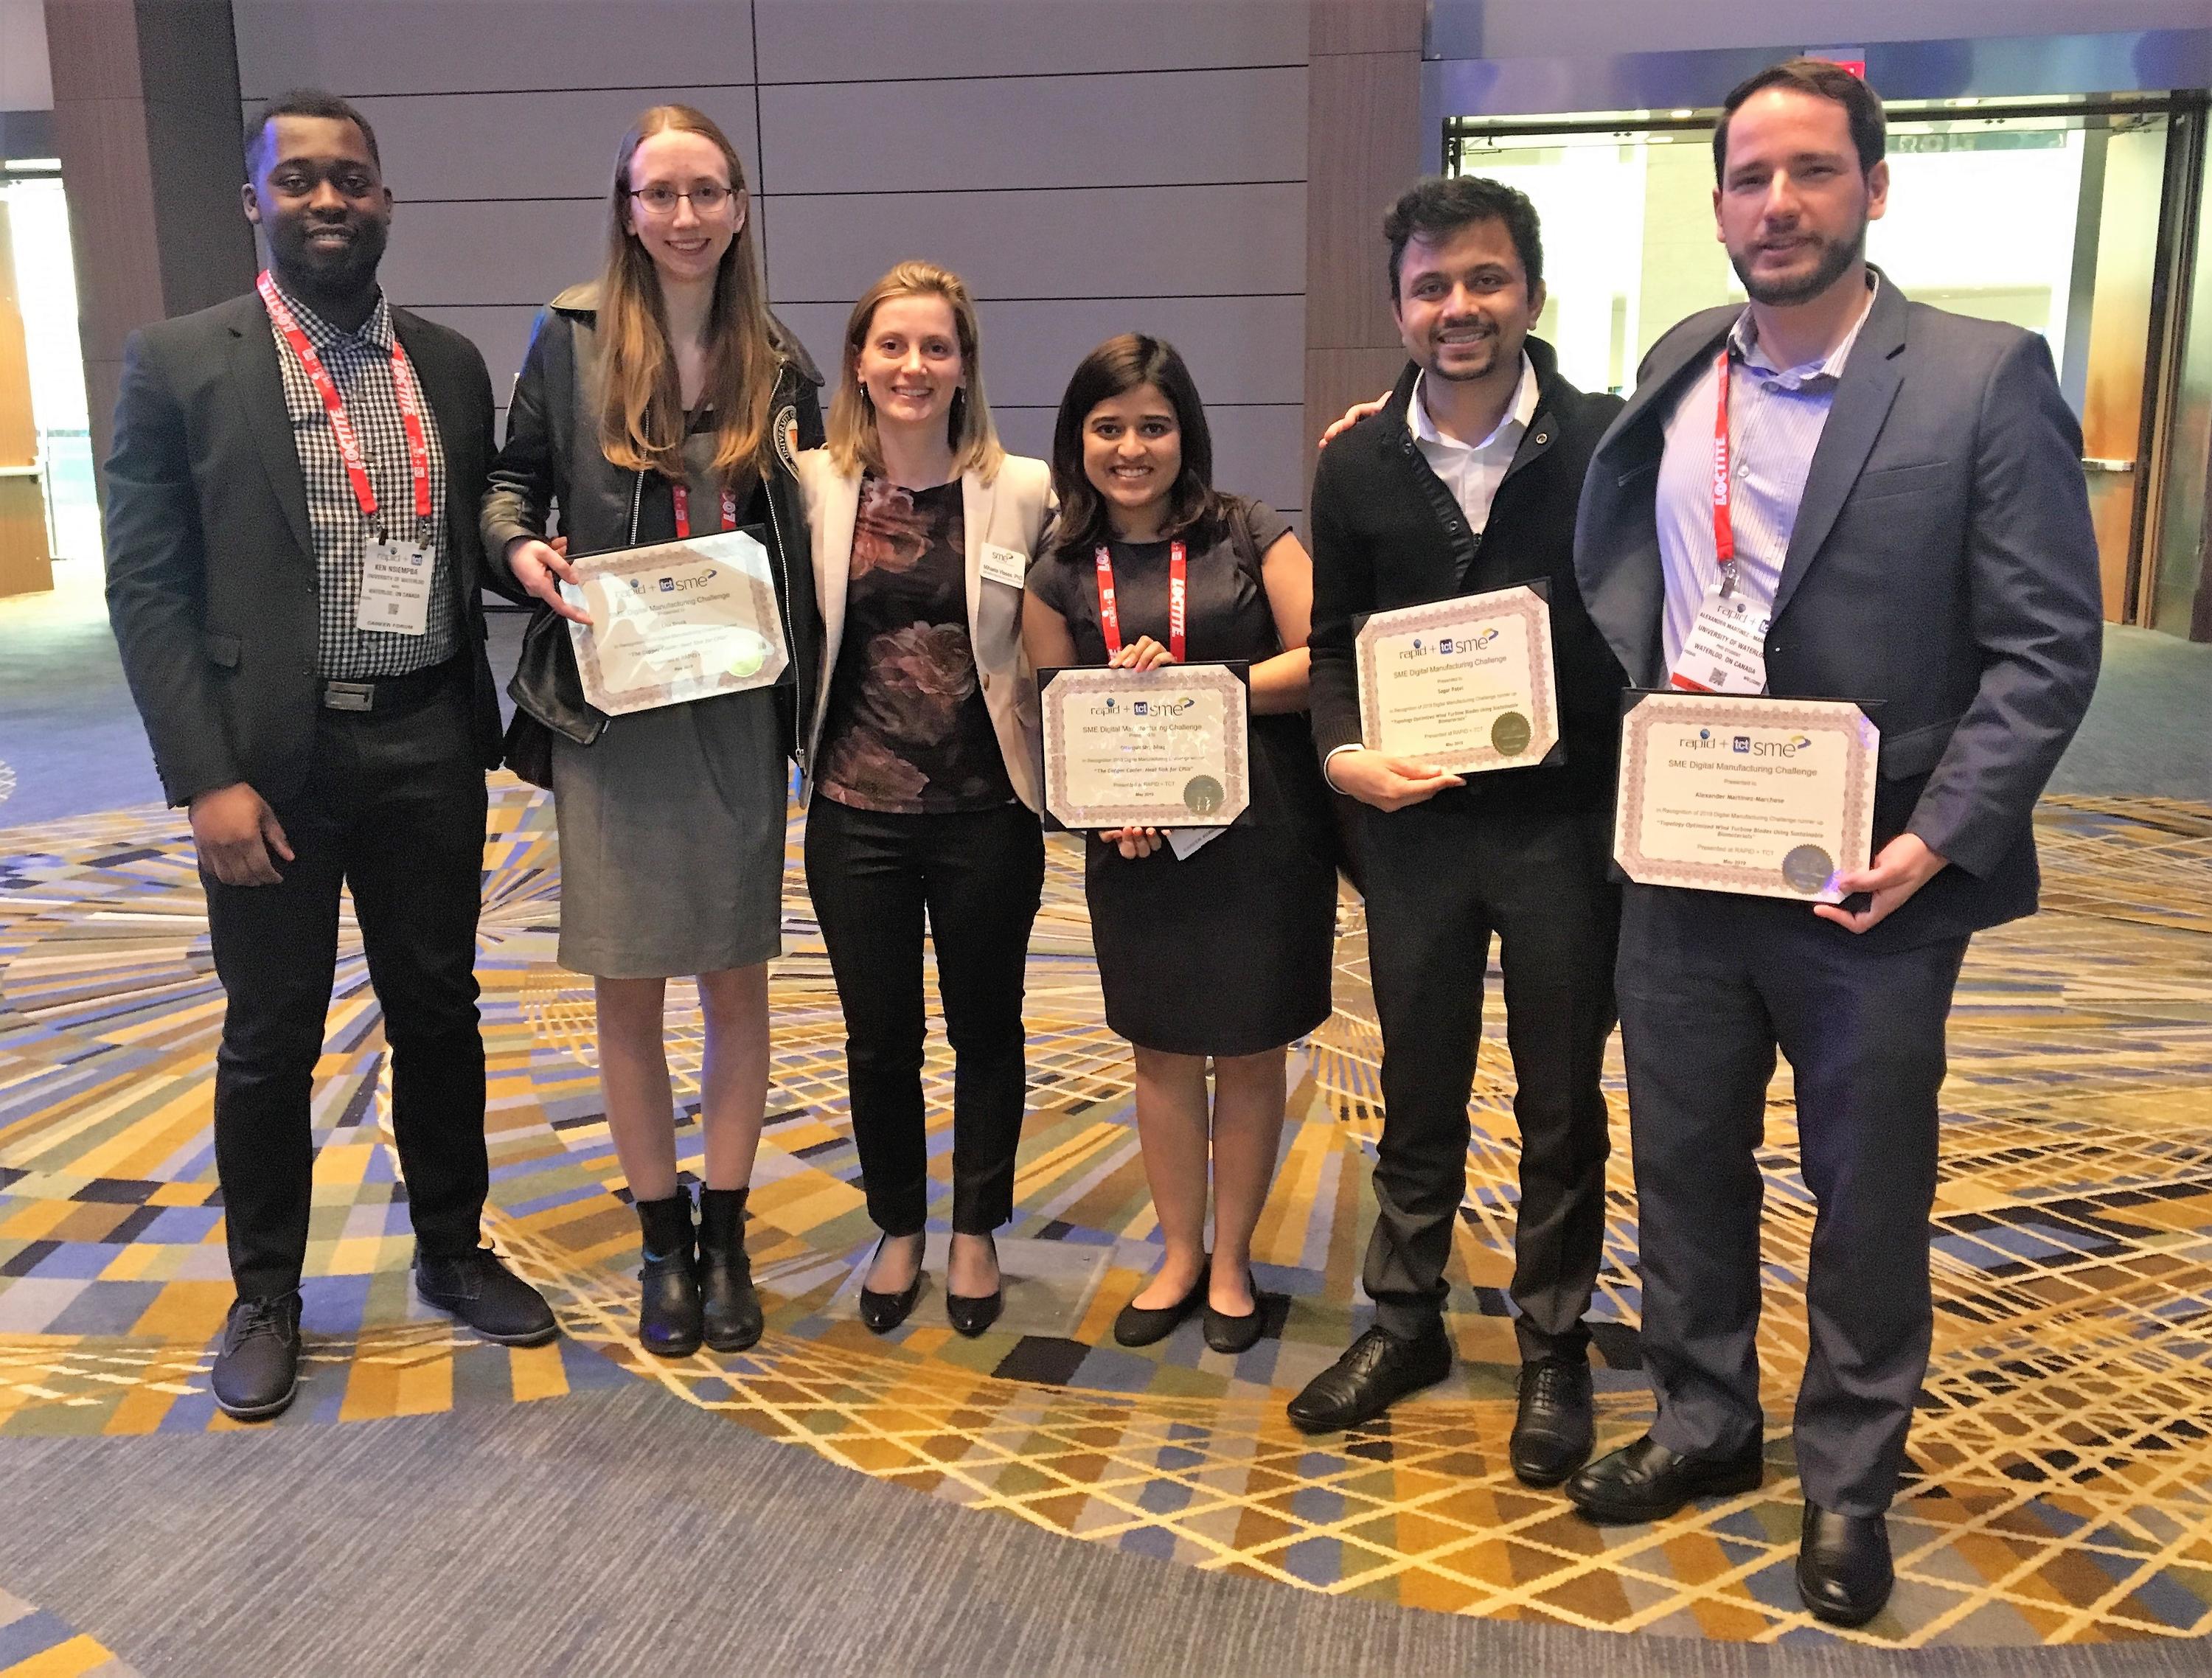 Graduate students (left to right) Ken Nsiempba, Lisa Brock, Gitanjali Shanbhag, Sagar Patel and Alex Martinez pose at the recent awards event with Mihaela Vlasea (third from left), a professor and associate research director at the MSAM Lab.